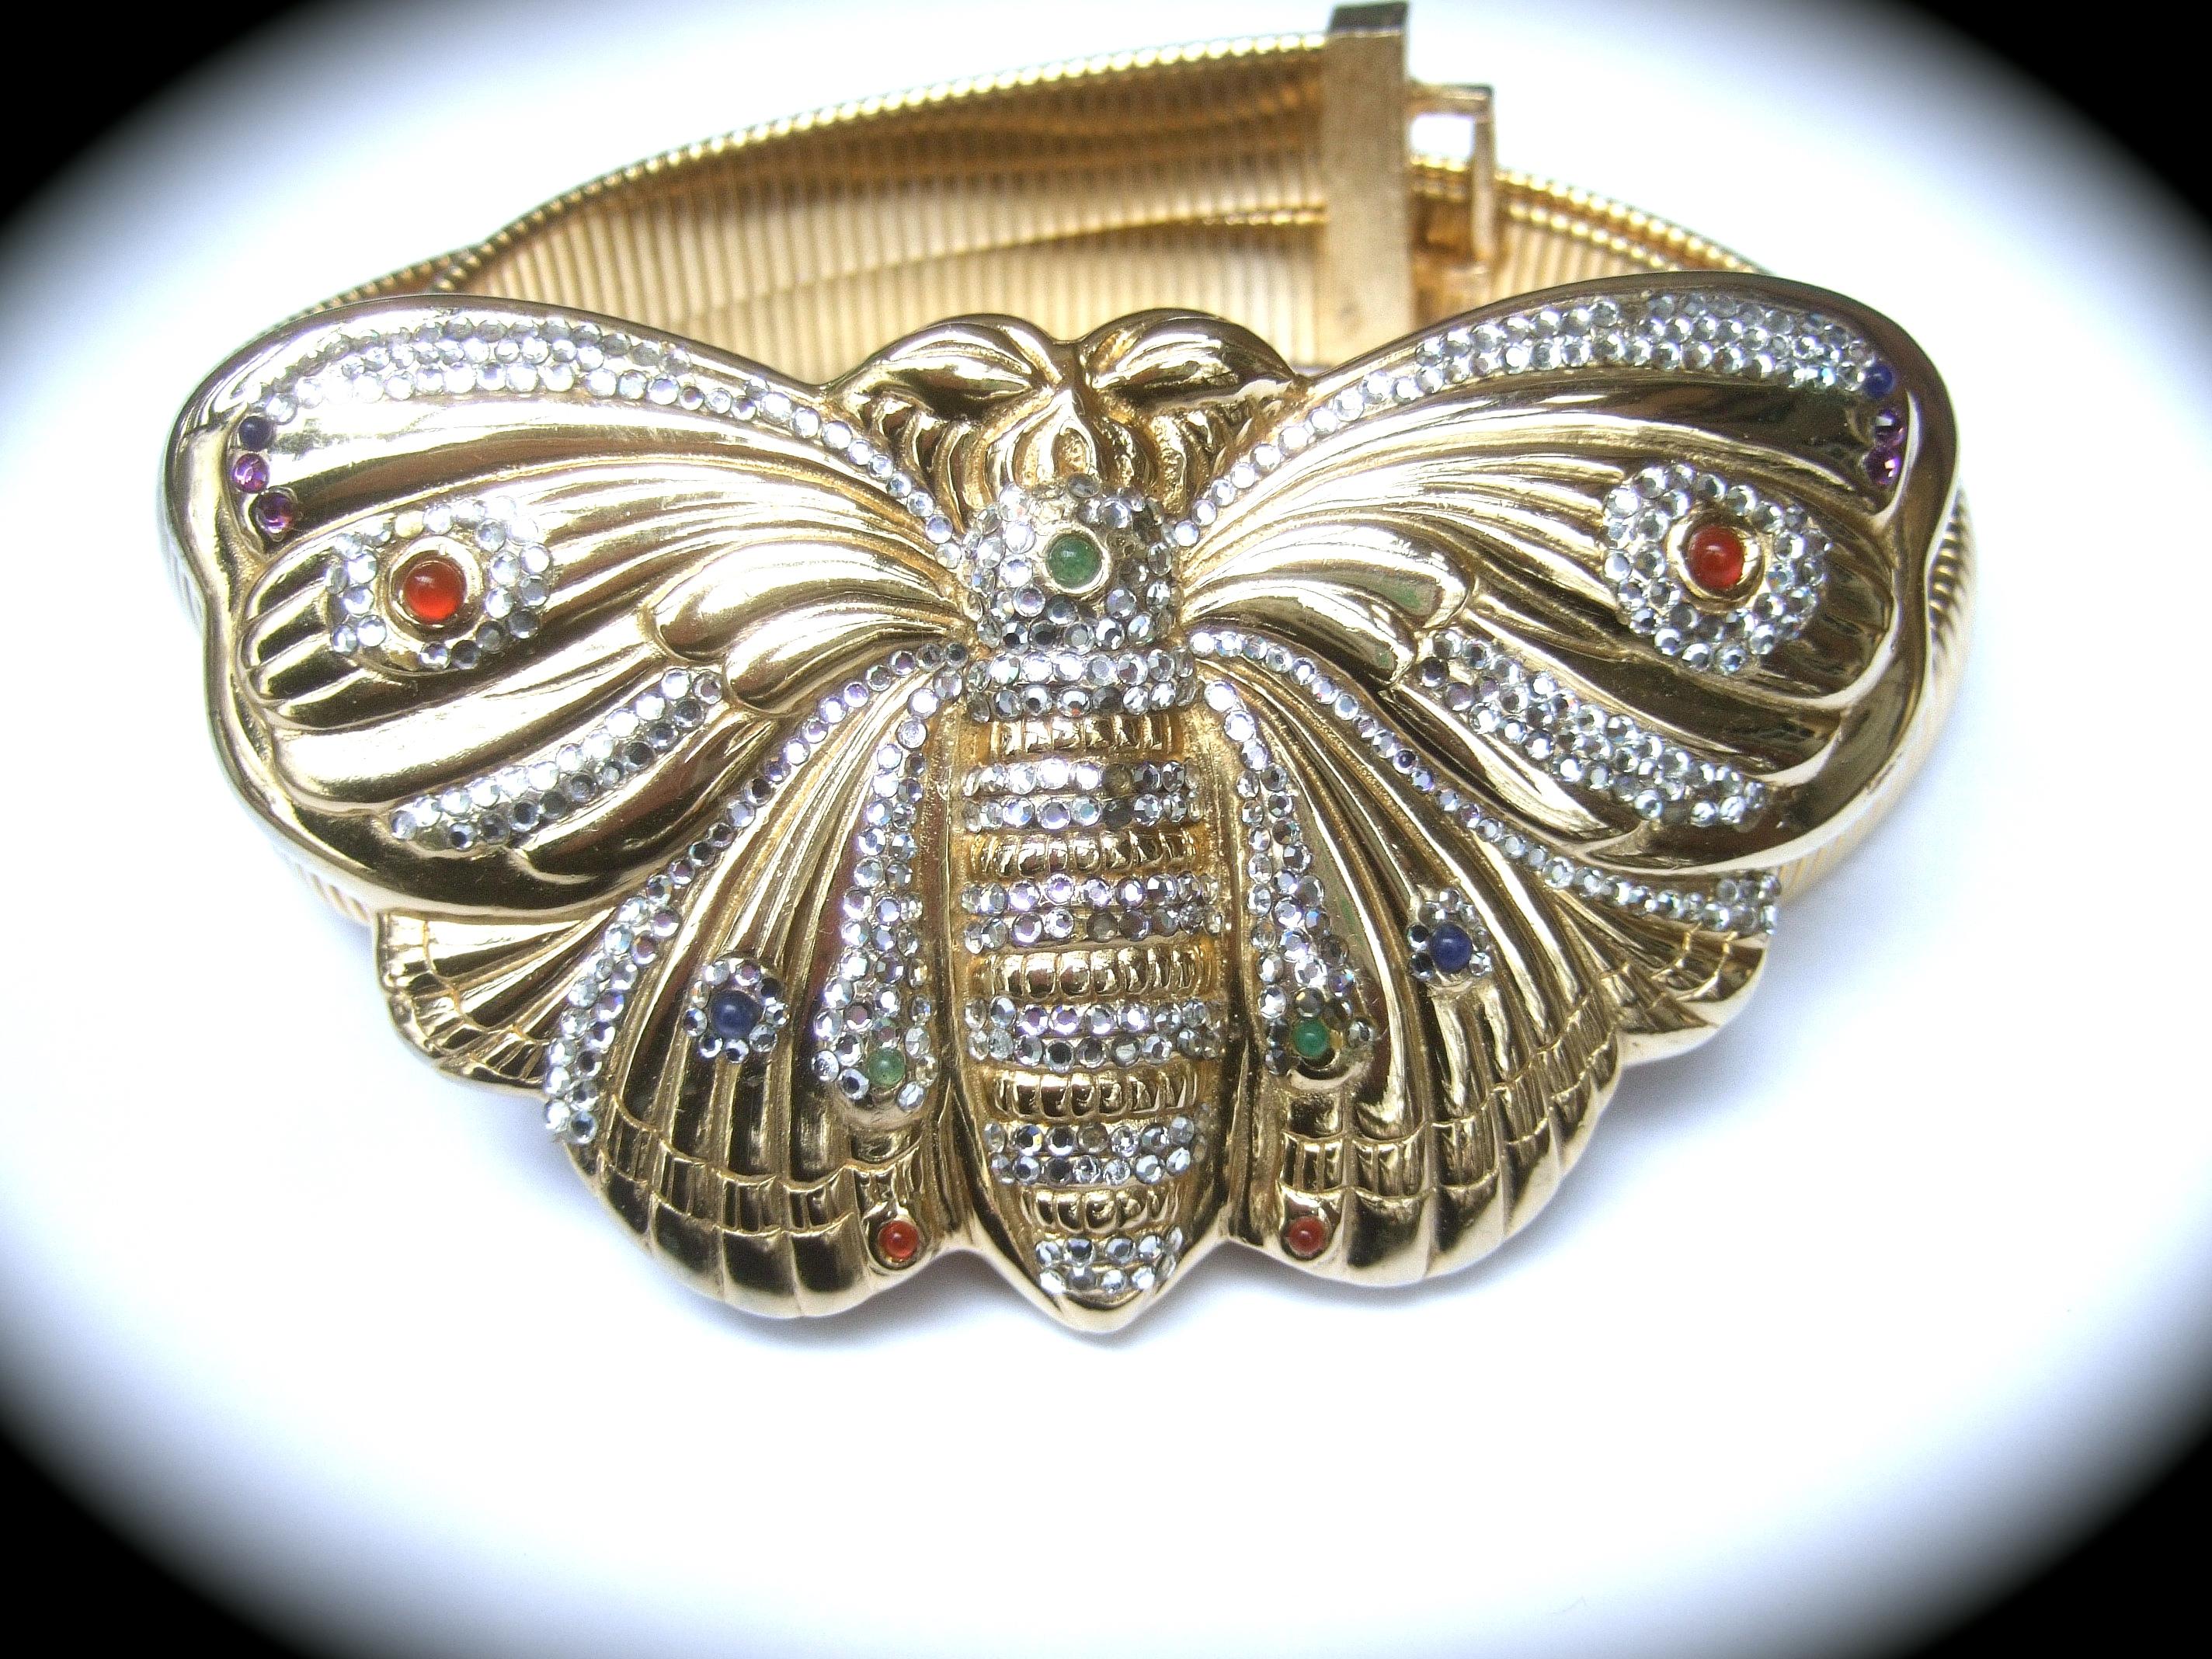 Judith Leiber Opulent crystal encrusted large scale gilt metal butterfly belt c 1980s
The massive gilt metal butterfly buckle is embellished with rows of intricate diamante crystals
Accented with jewel-tone small glass cabochons 

The massive